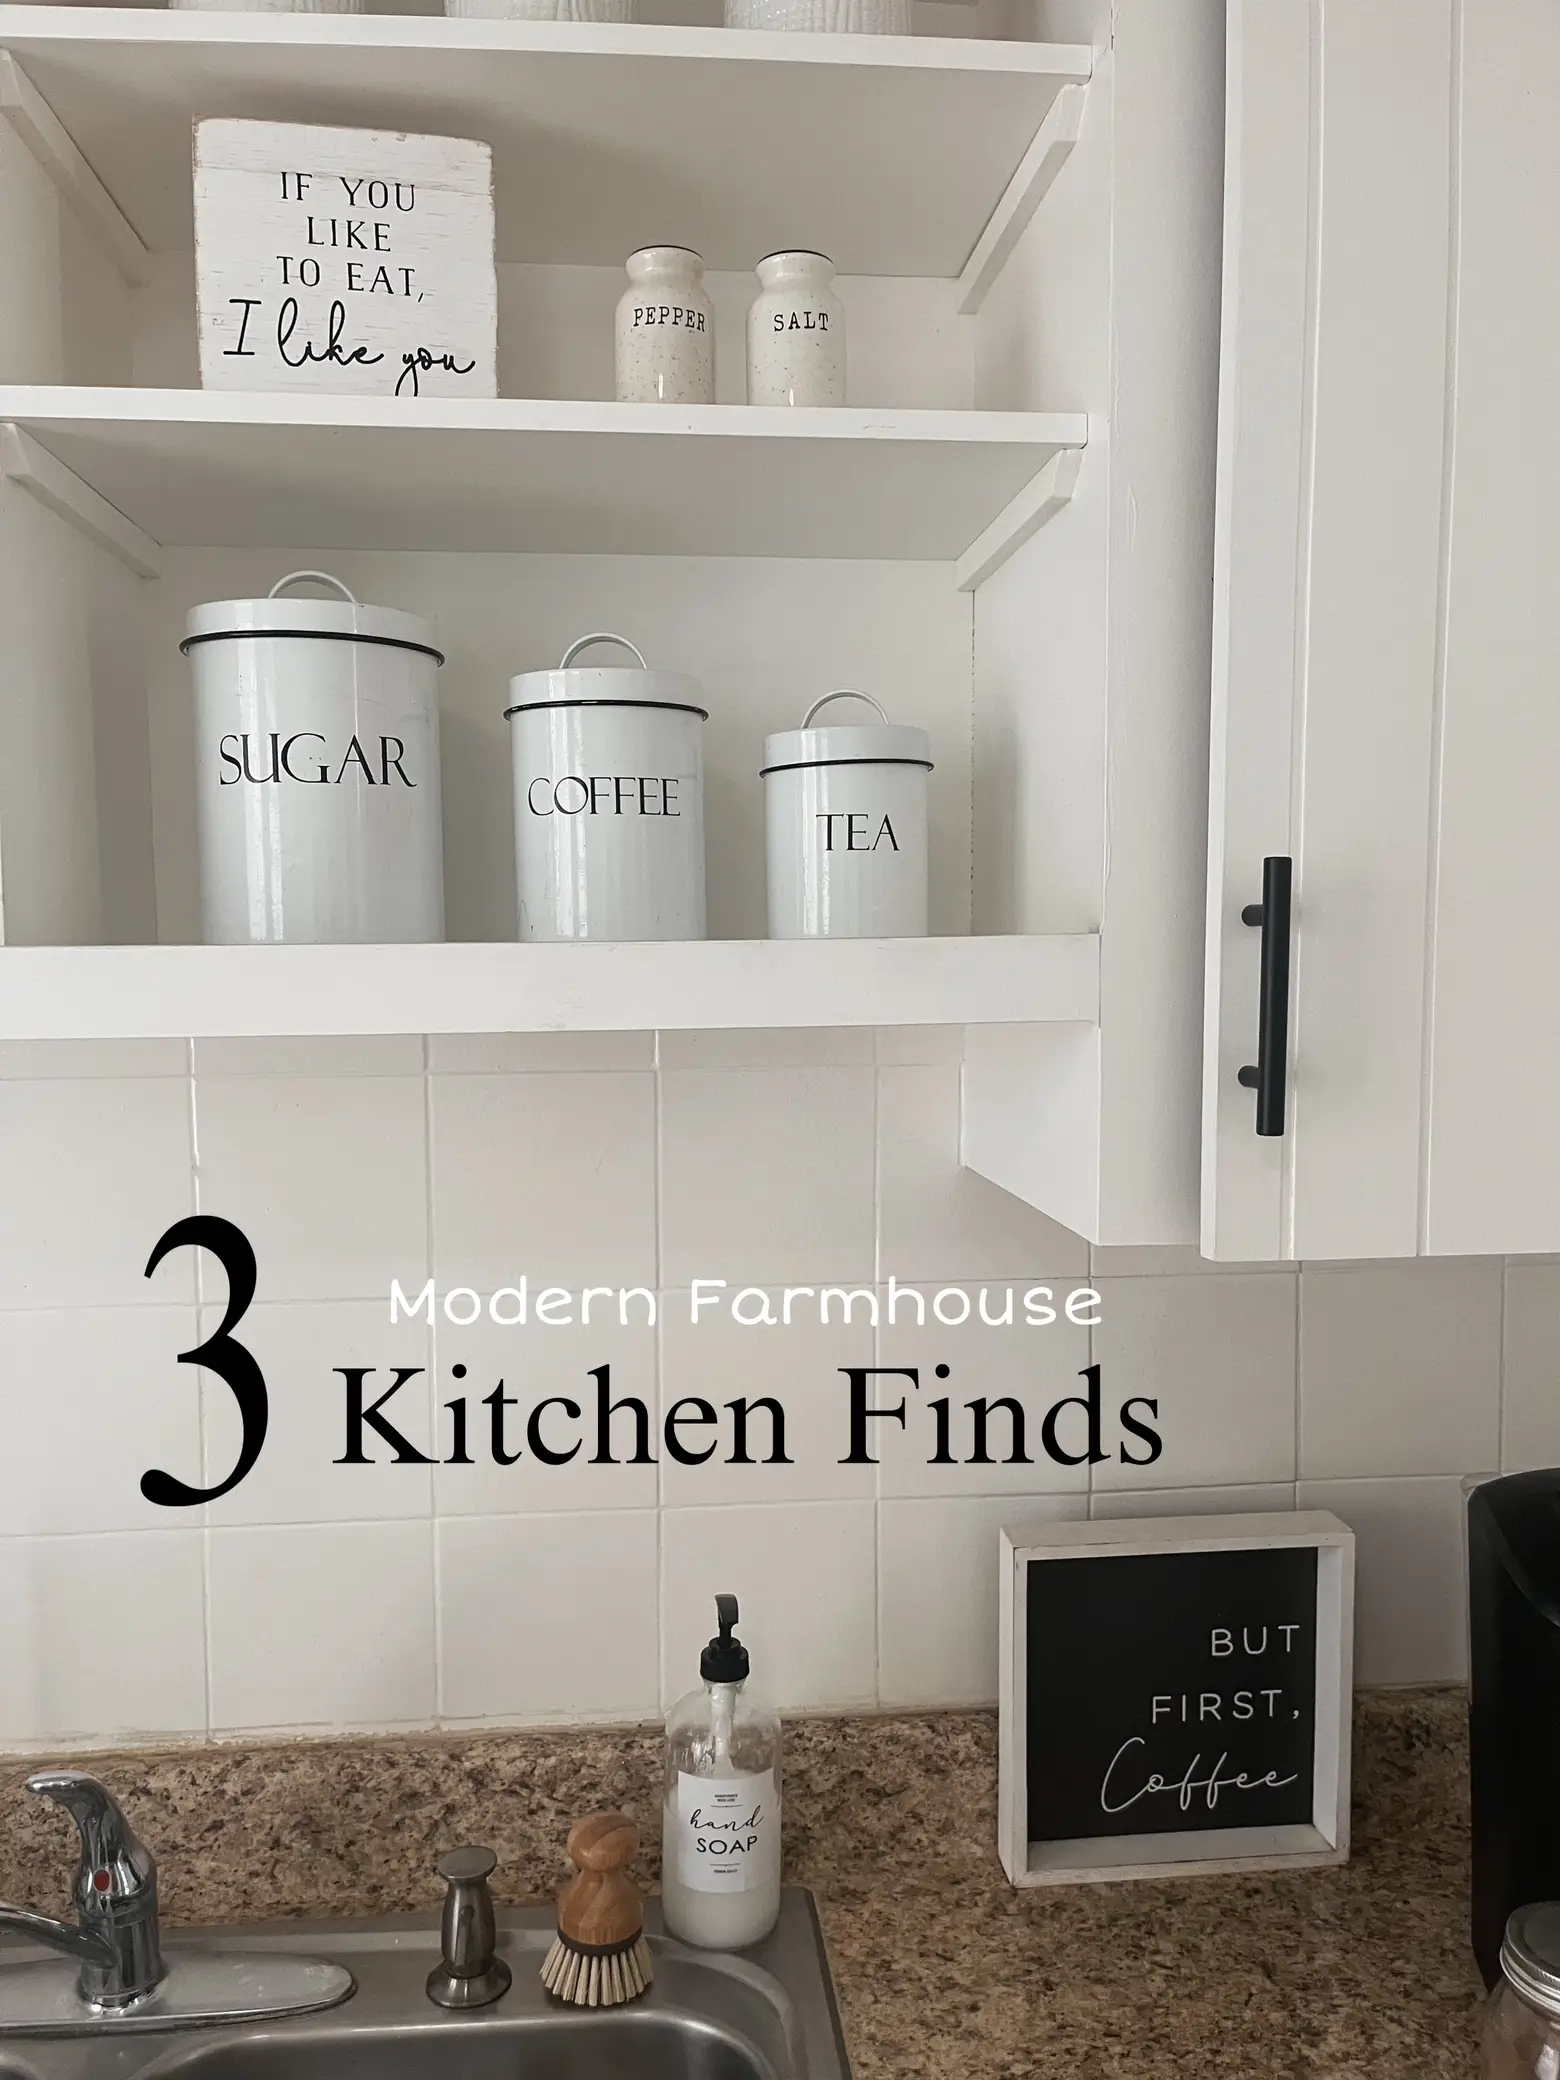 The 7th one is a must in the kitchen! #finds